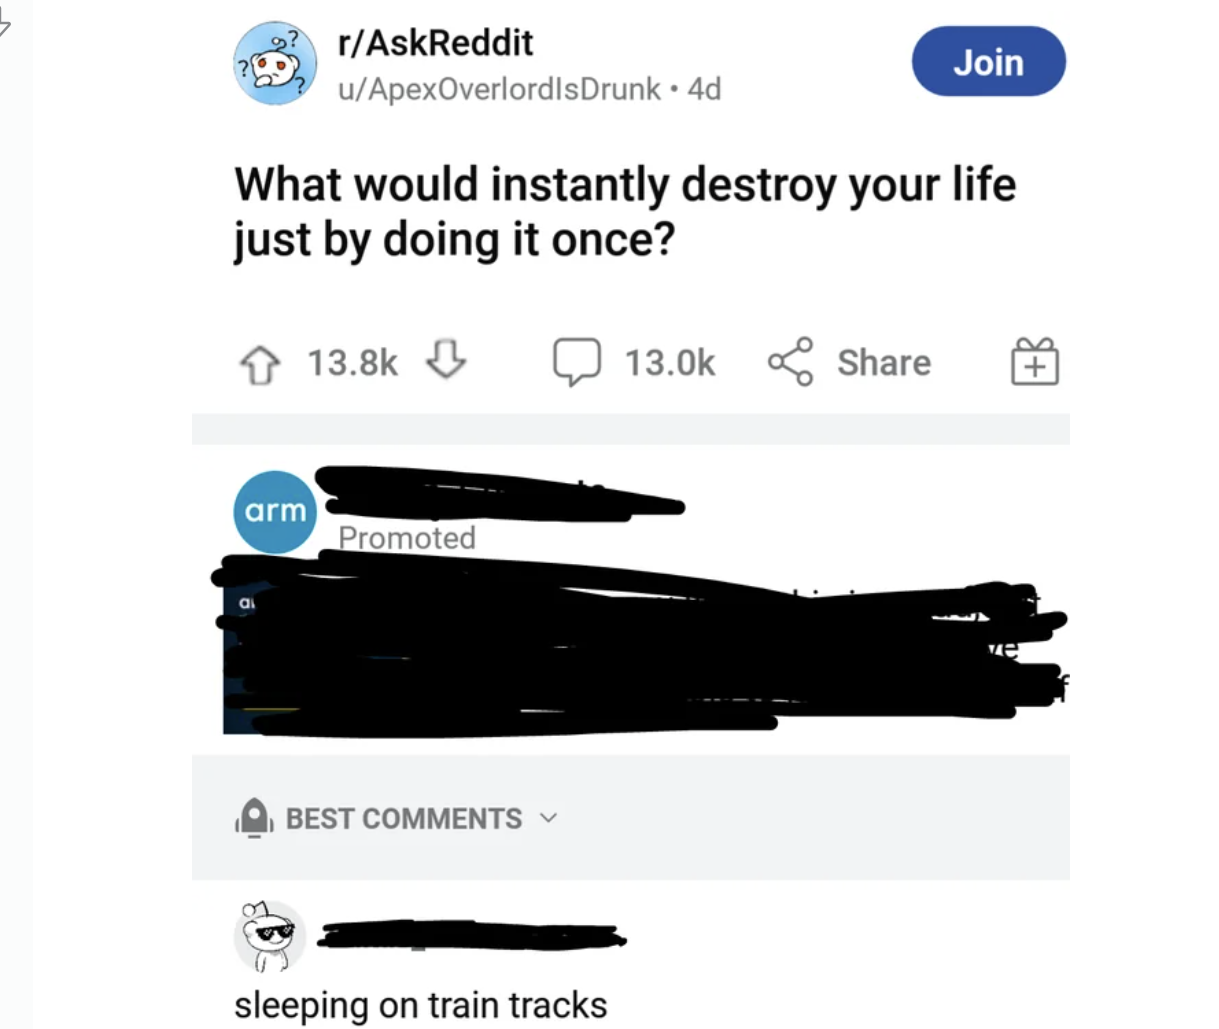 graphics - rAskReddit uApexOverlordlsDrunk 4d Join What would instantly destroy your life just by doing it once? arm Promoted Best sleeping on train tracks ve